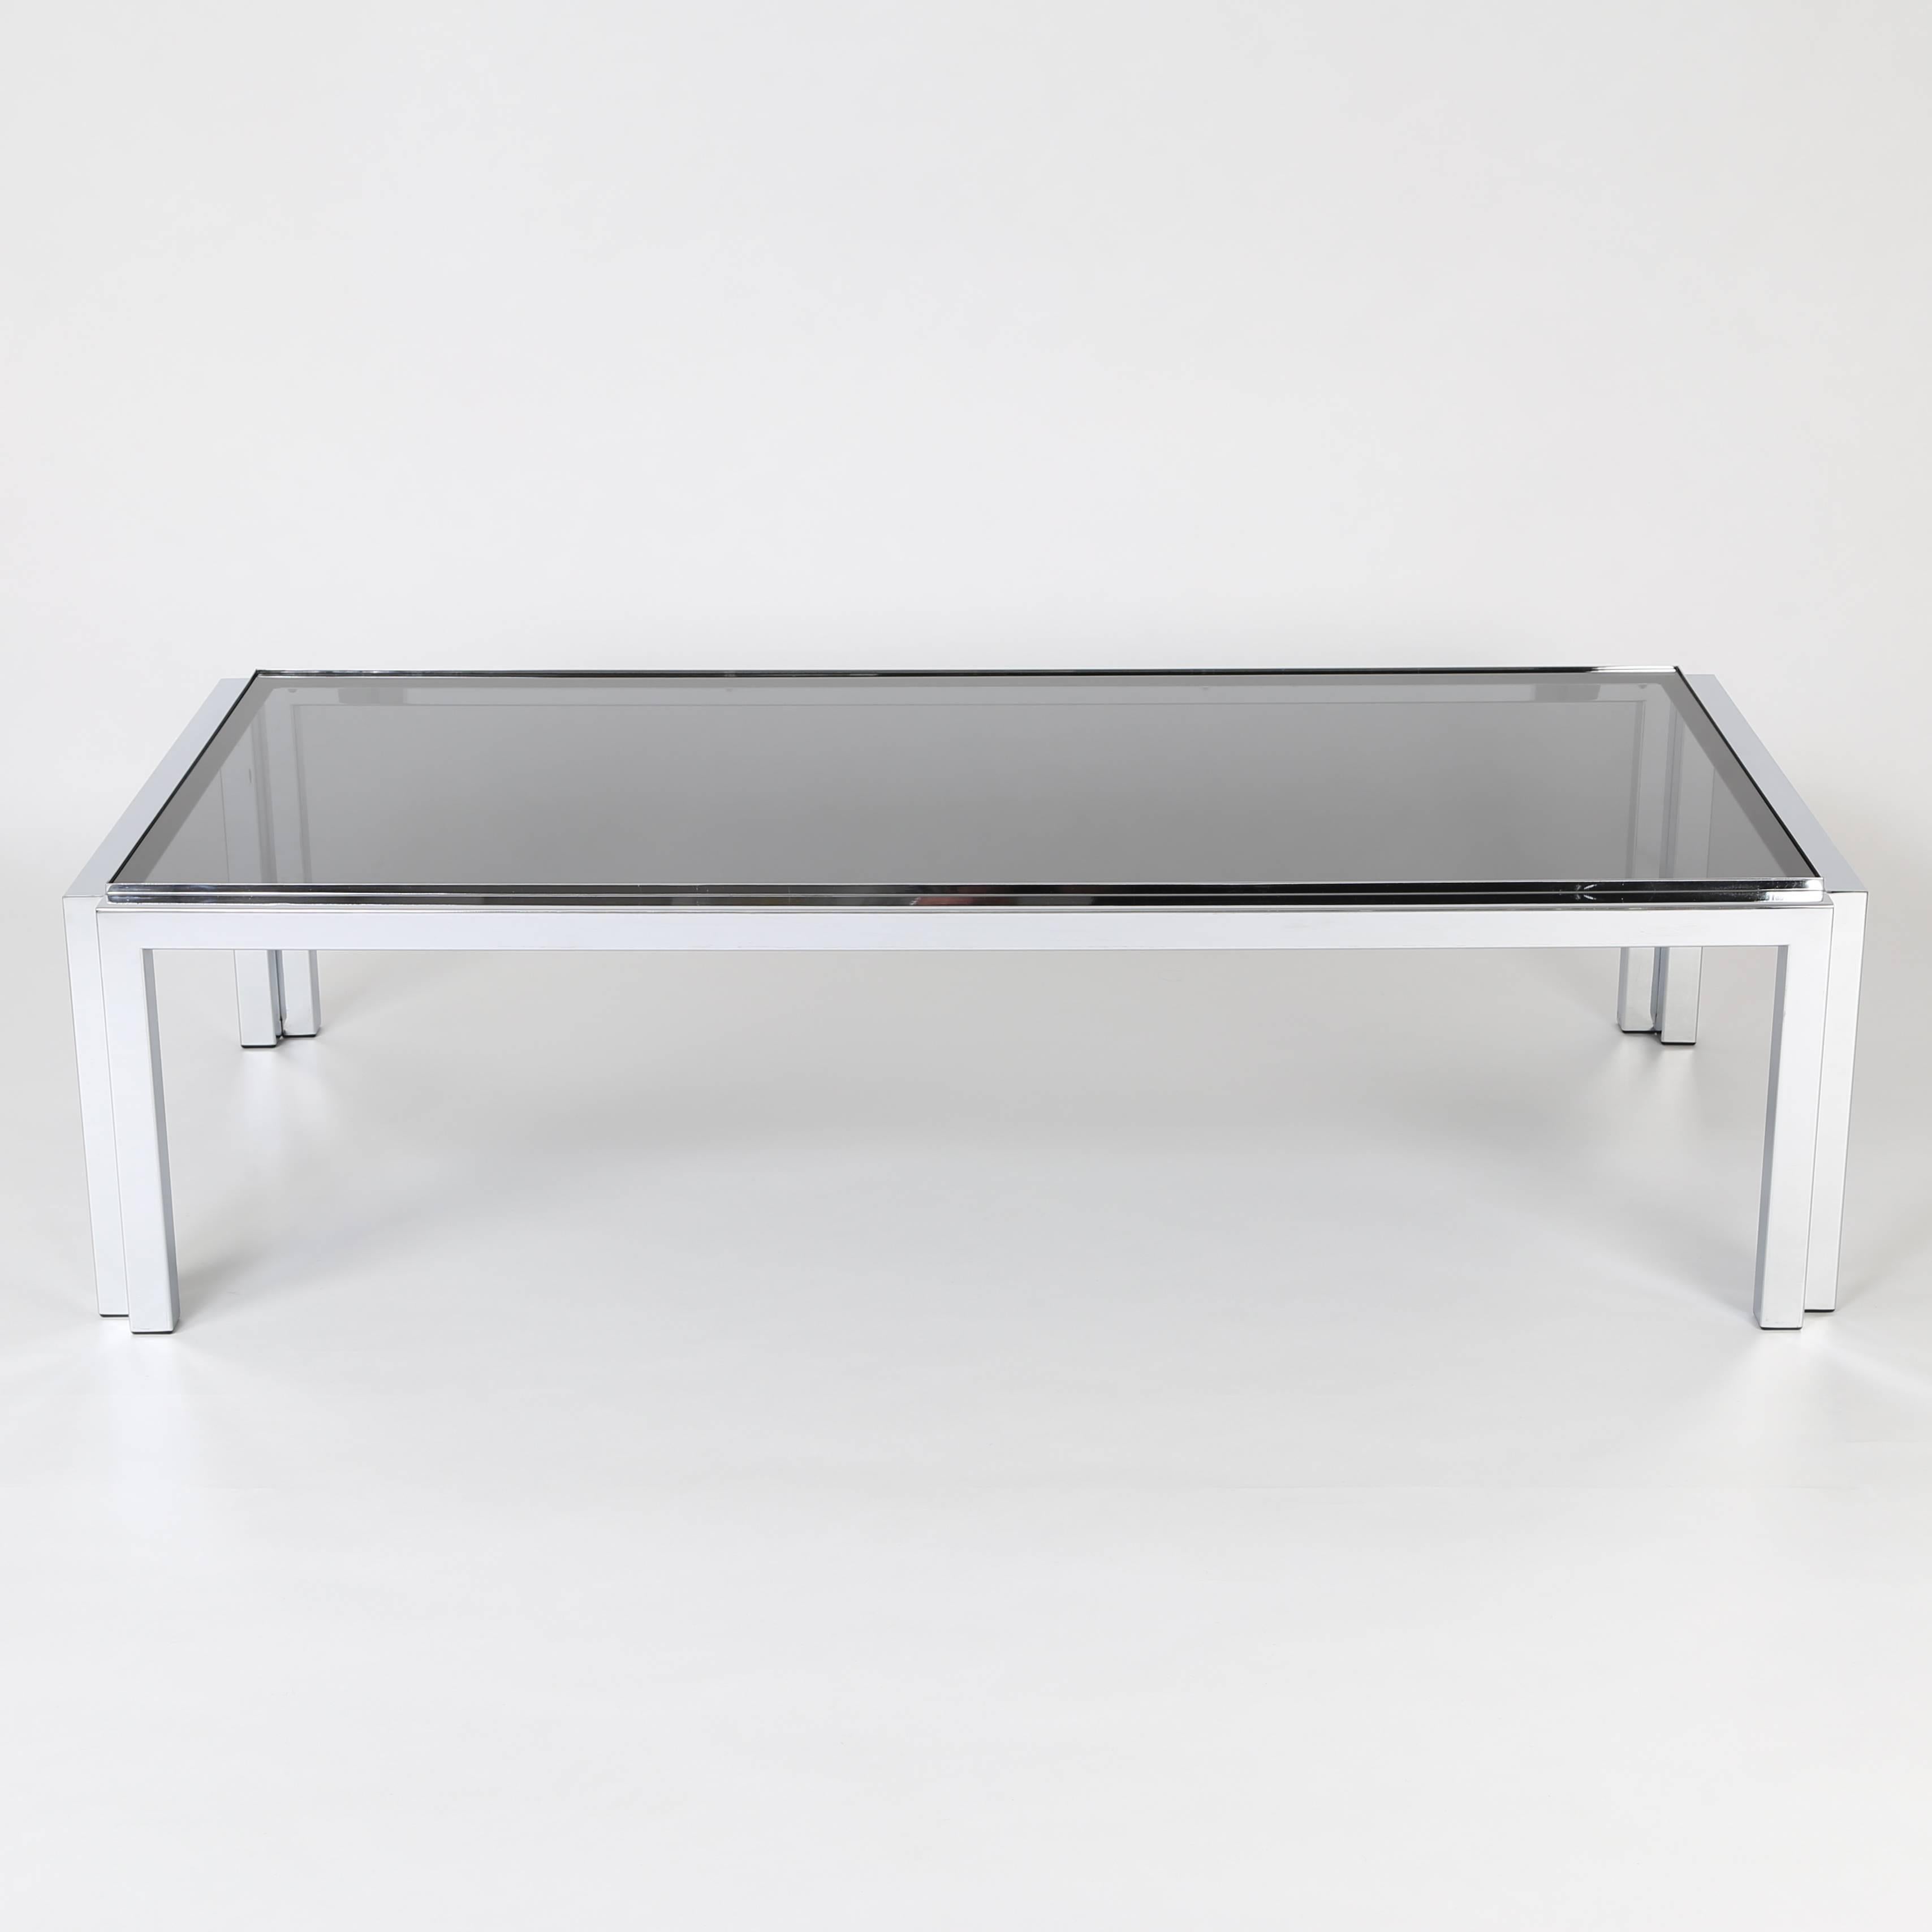 Large and sleek rectangular cocktail table features a square tubular chrome frame that supports an inset 3/8